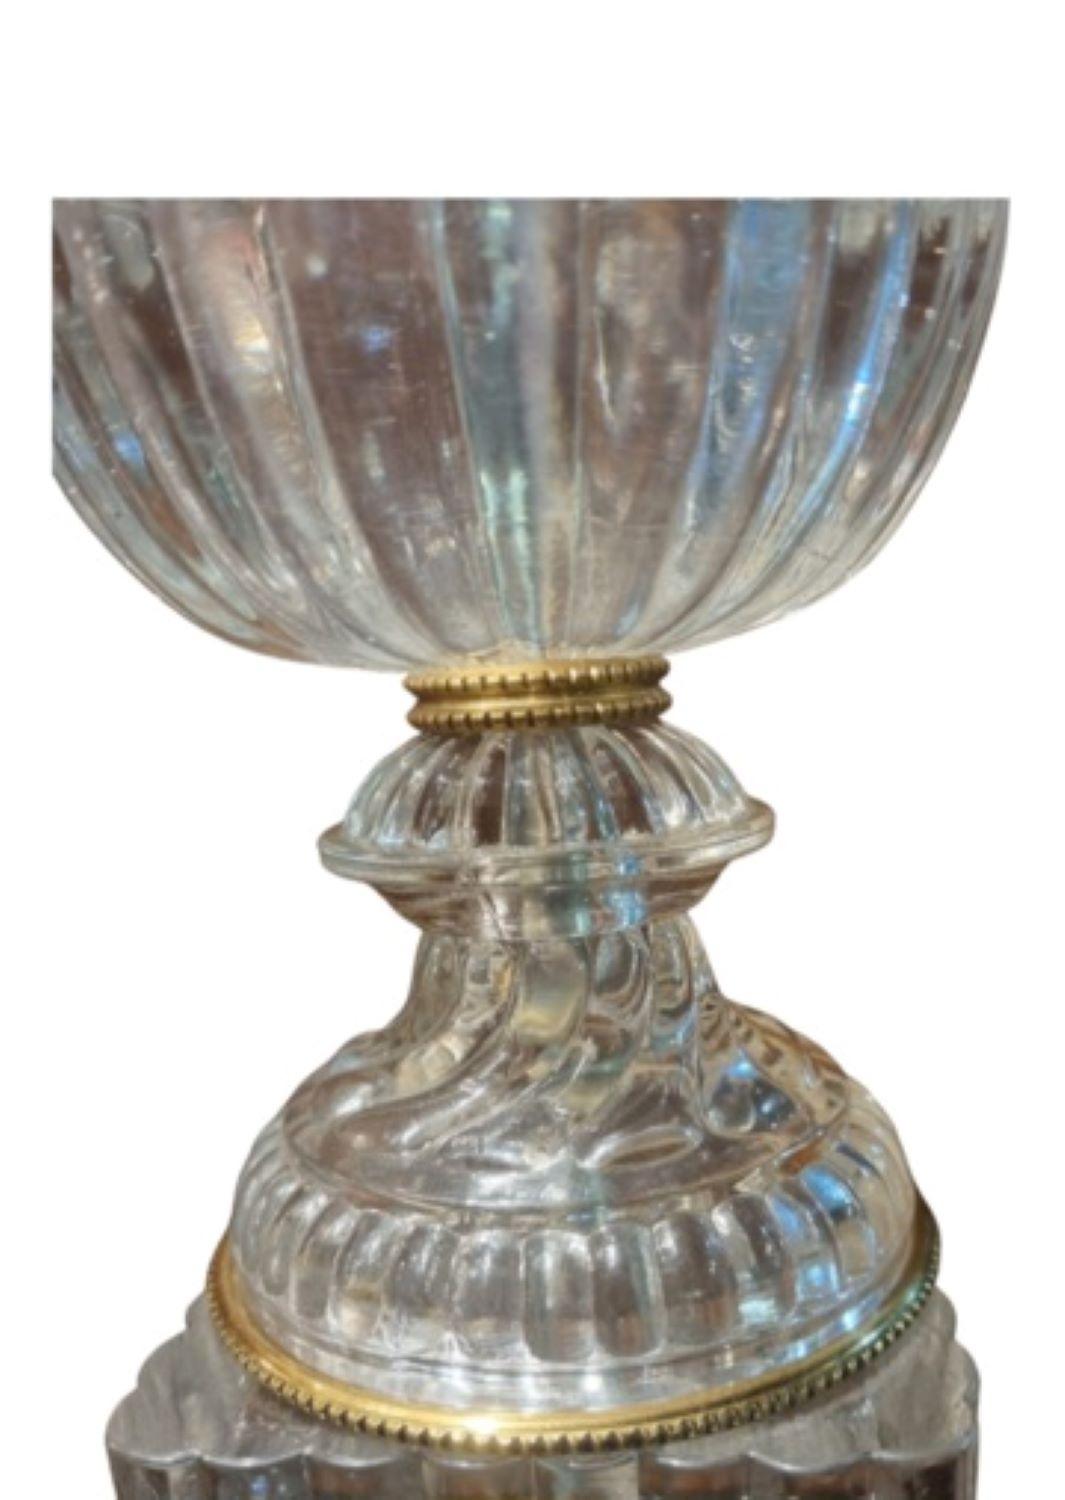 A Lovely Pair of Bohemian Style Urn Shaped Crystal Table Lamps
These Lamps are of Amazing Quality and made From Thick Crystal
Very Striking when lit as the Crystal Reflects the Light
Lampshades not Included.